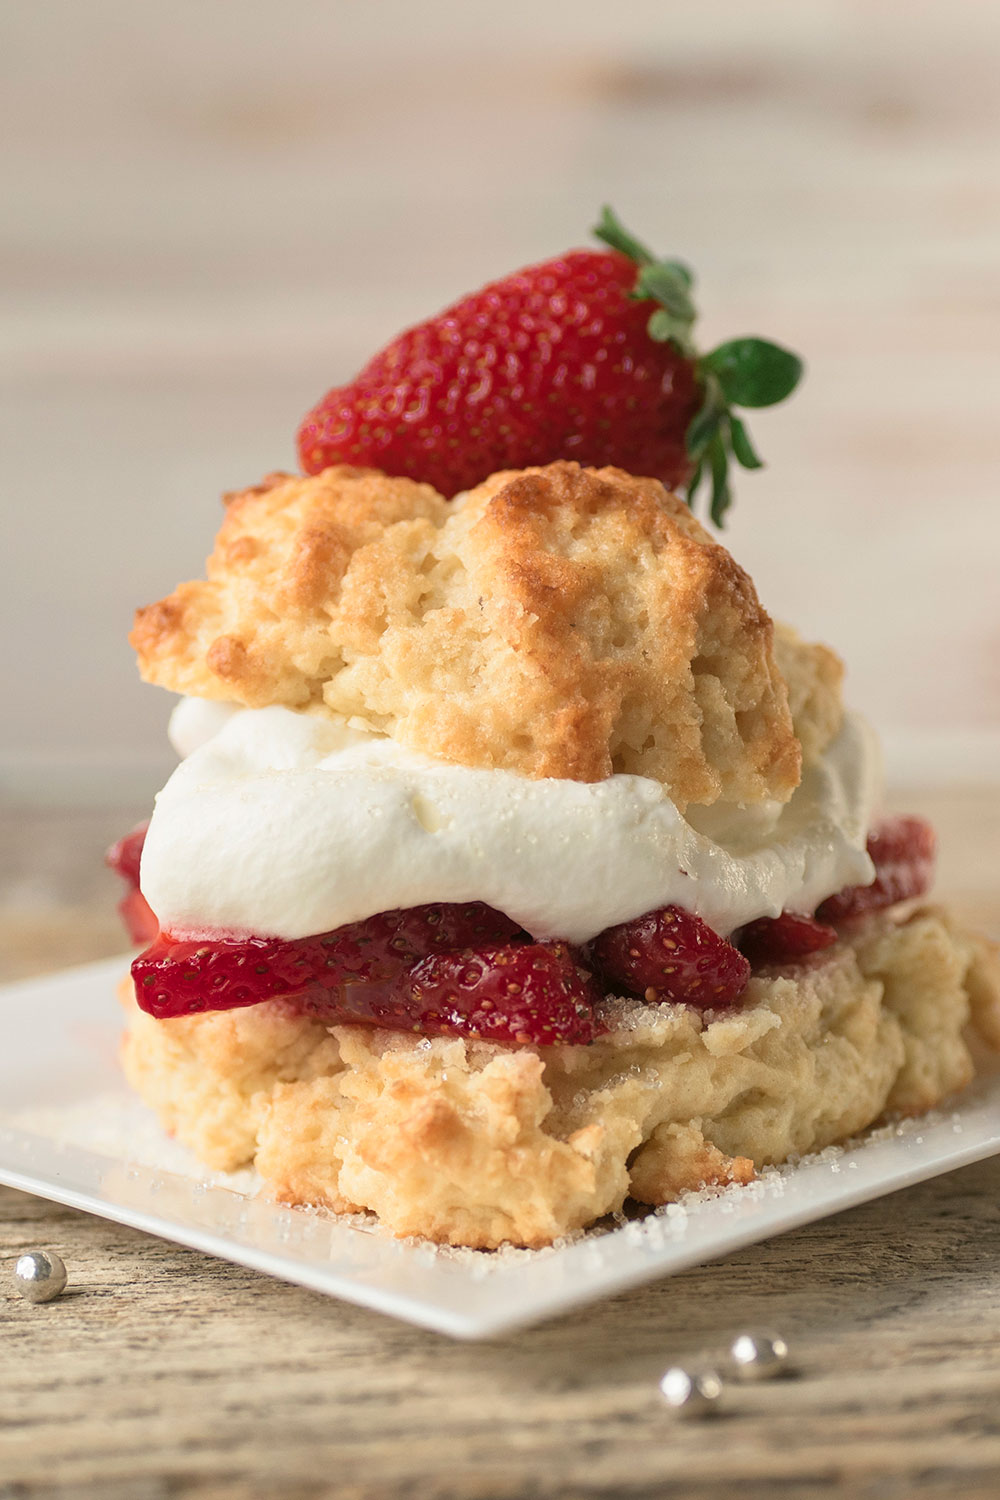 Strawberry Shortcake for Two